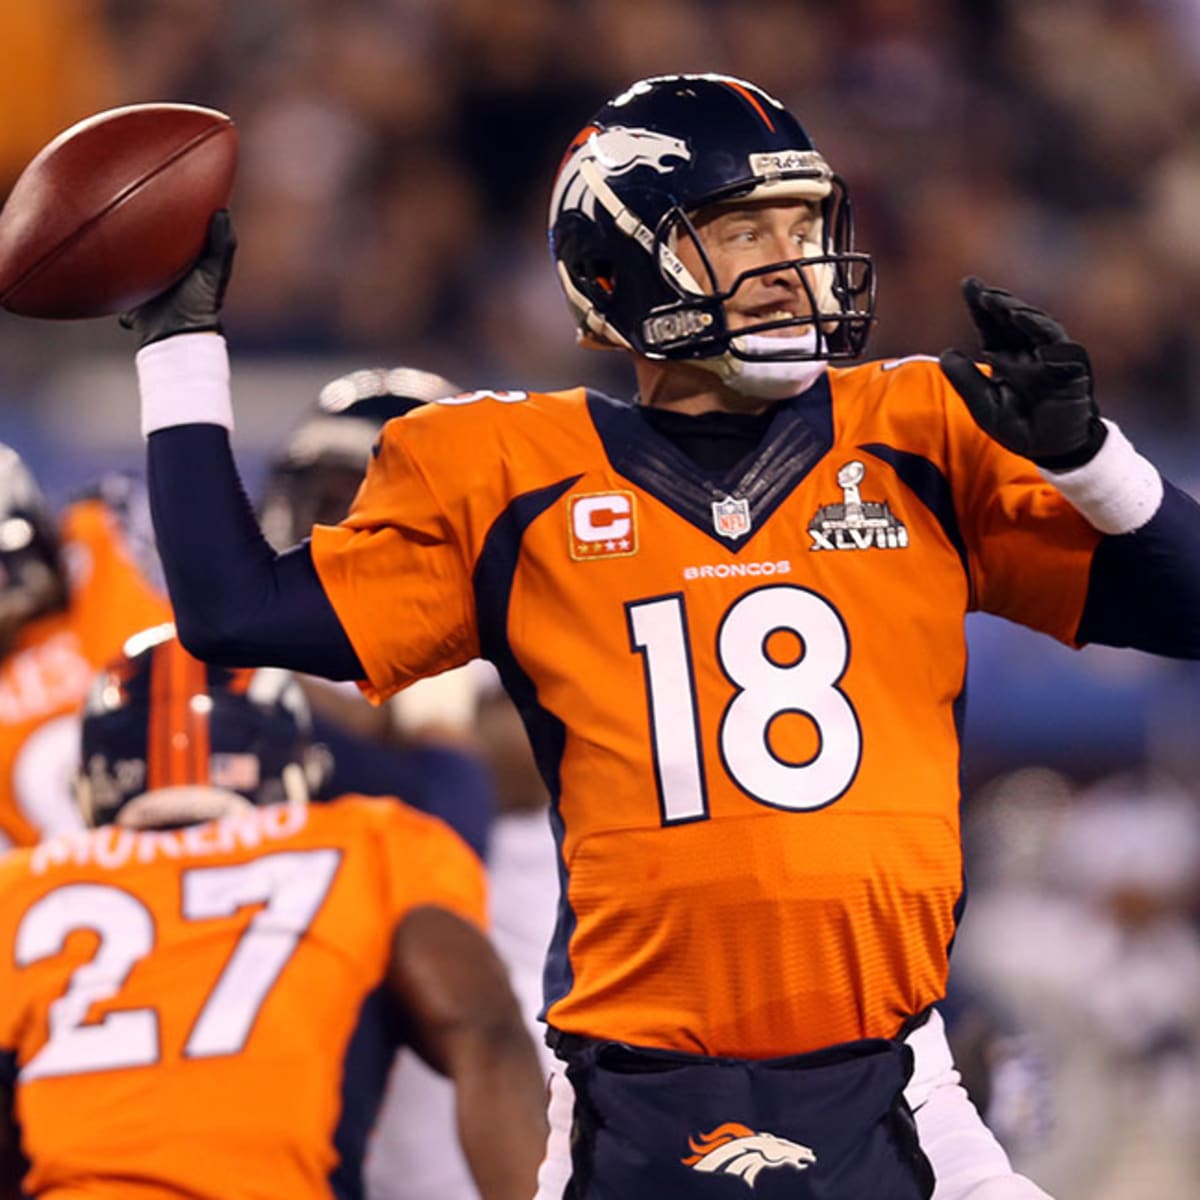 Feb 2, 2014: Super Bowl XLVIII. Tell us your most memorable moment